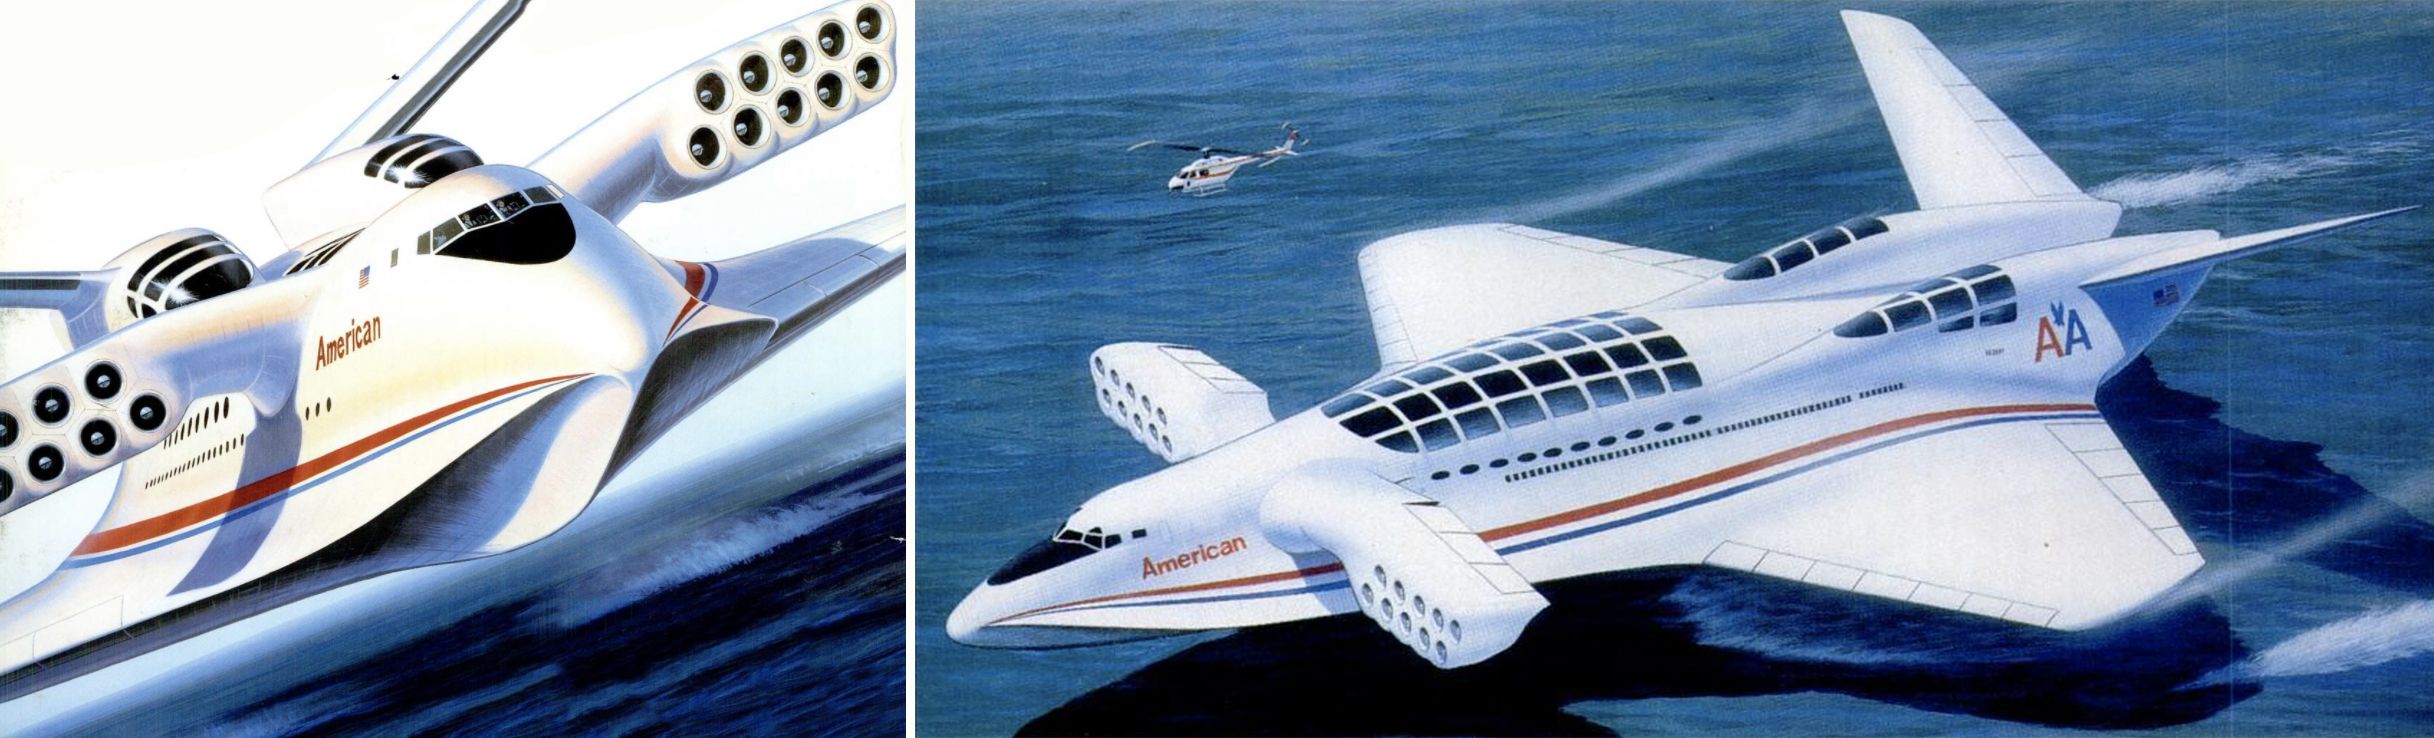 Russia Developing a New Air-Riding 'Sea Monster